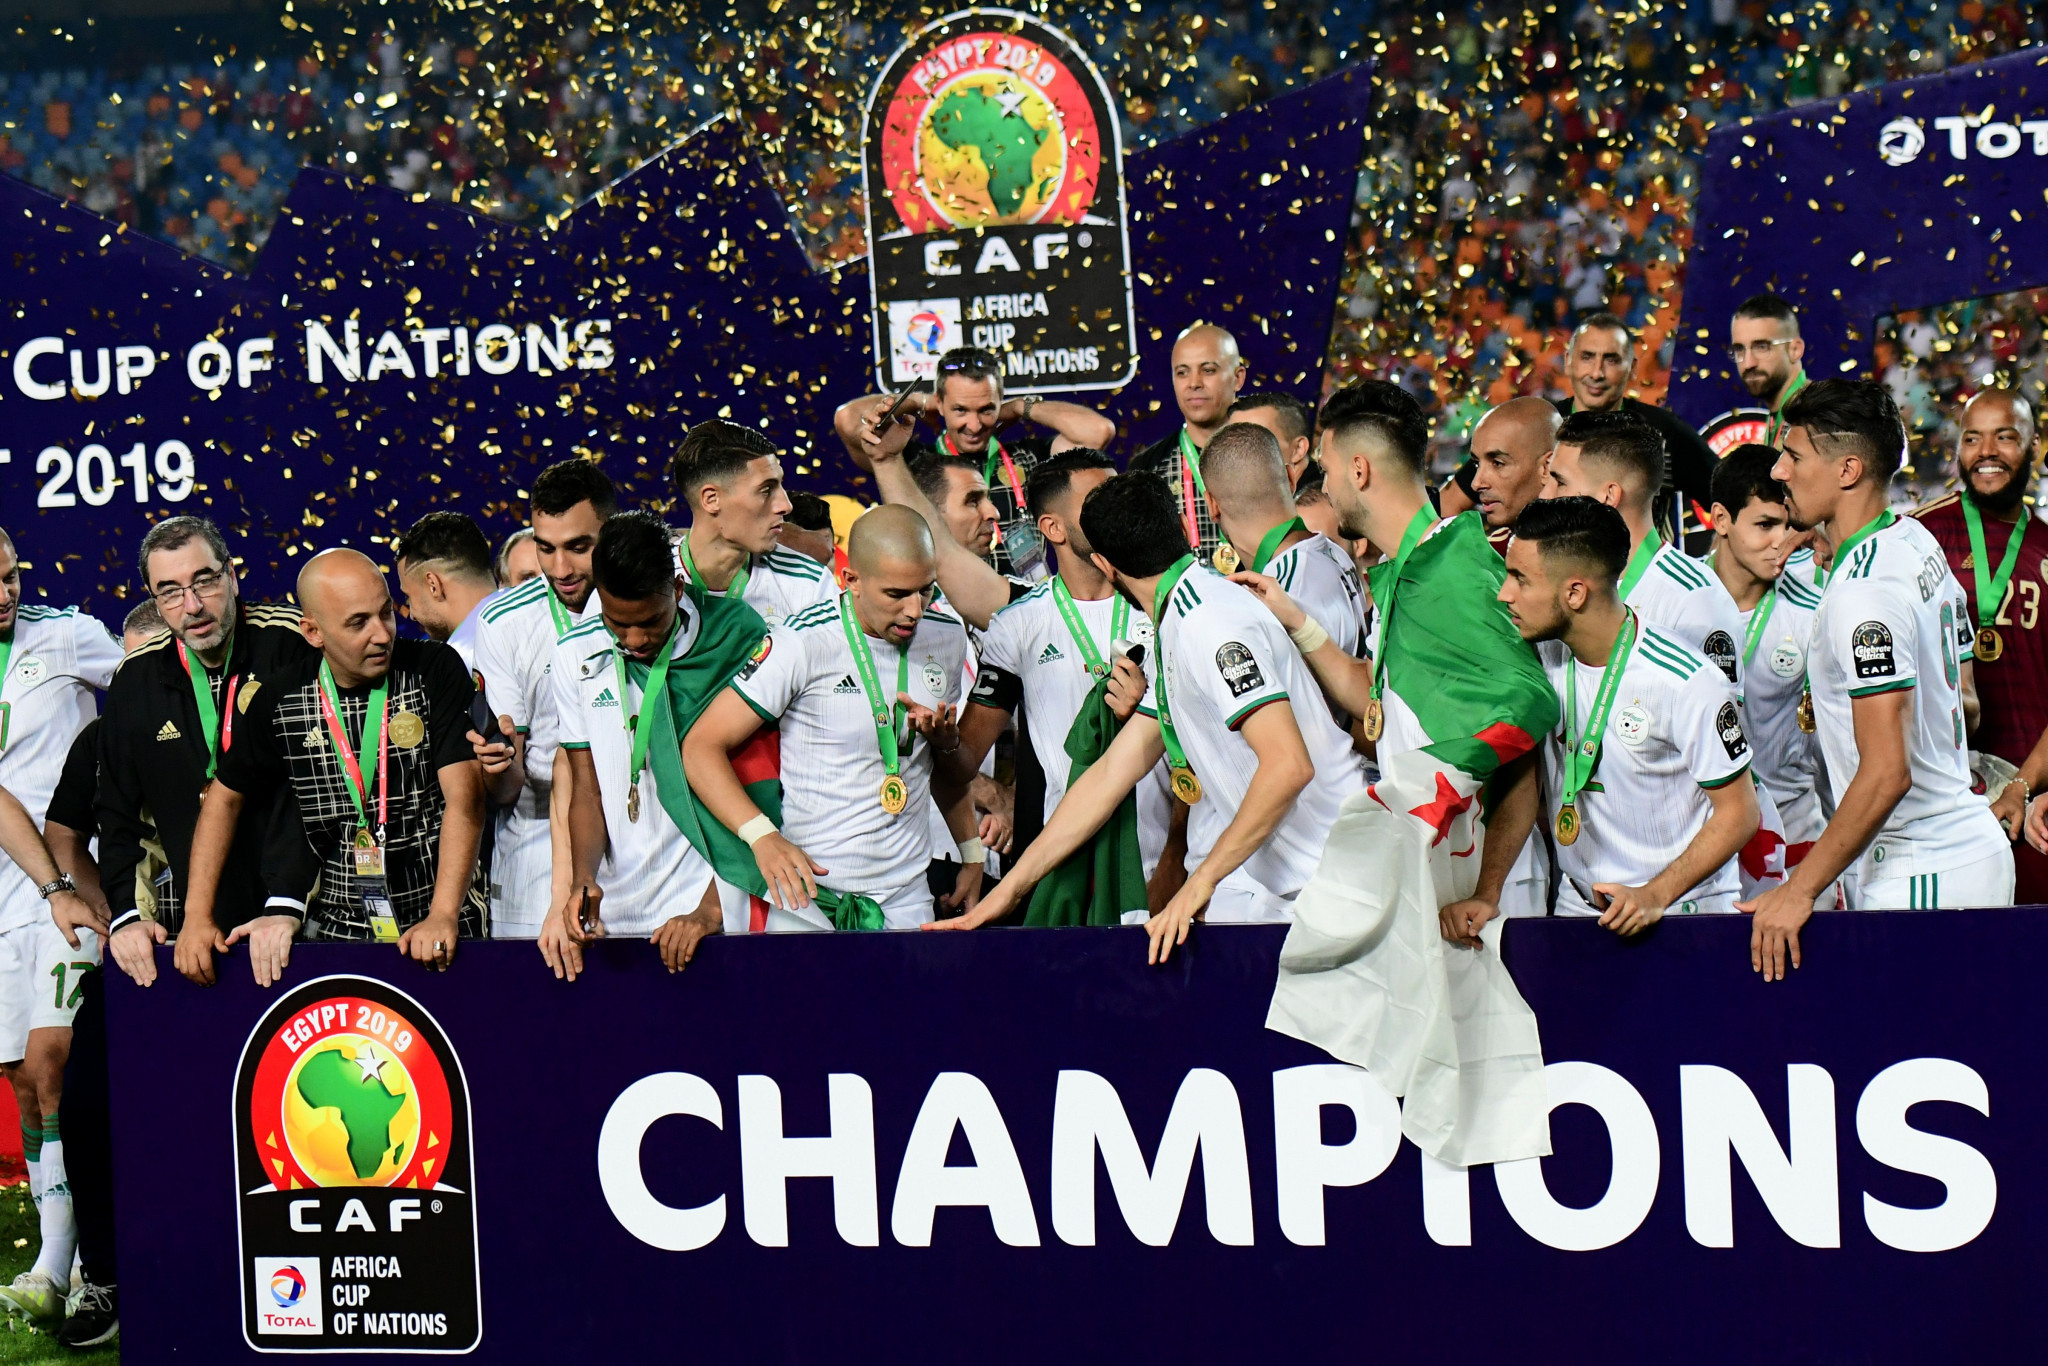 Africa Cup of Nations holders Algeria have been drawn in Group E for next year's tournament, alongside Sierra Leone, Equatorial Guinea and Ivory Coast ©Getty Images